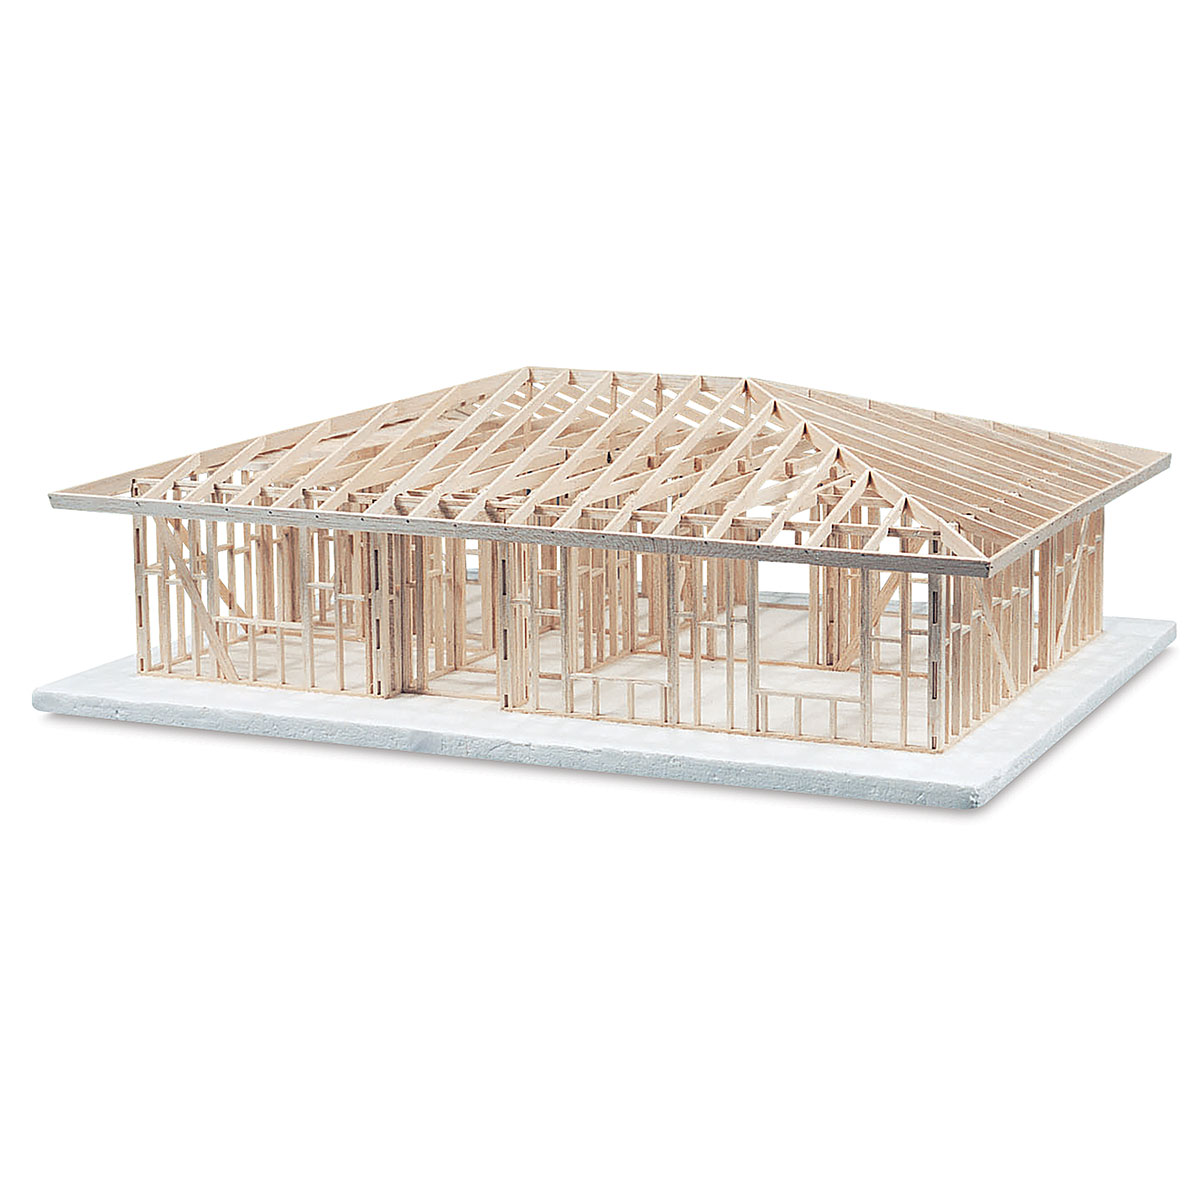 LED Light Architectural Model Making Materials / 1/100 Scale Residential  Physical Scale Maquette